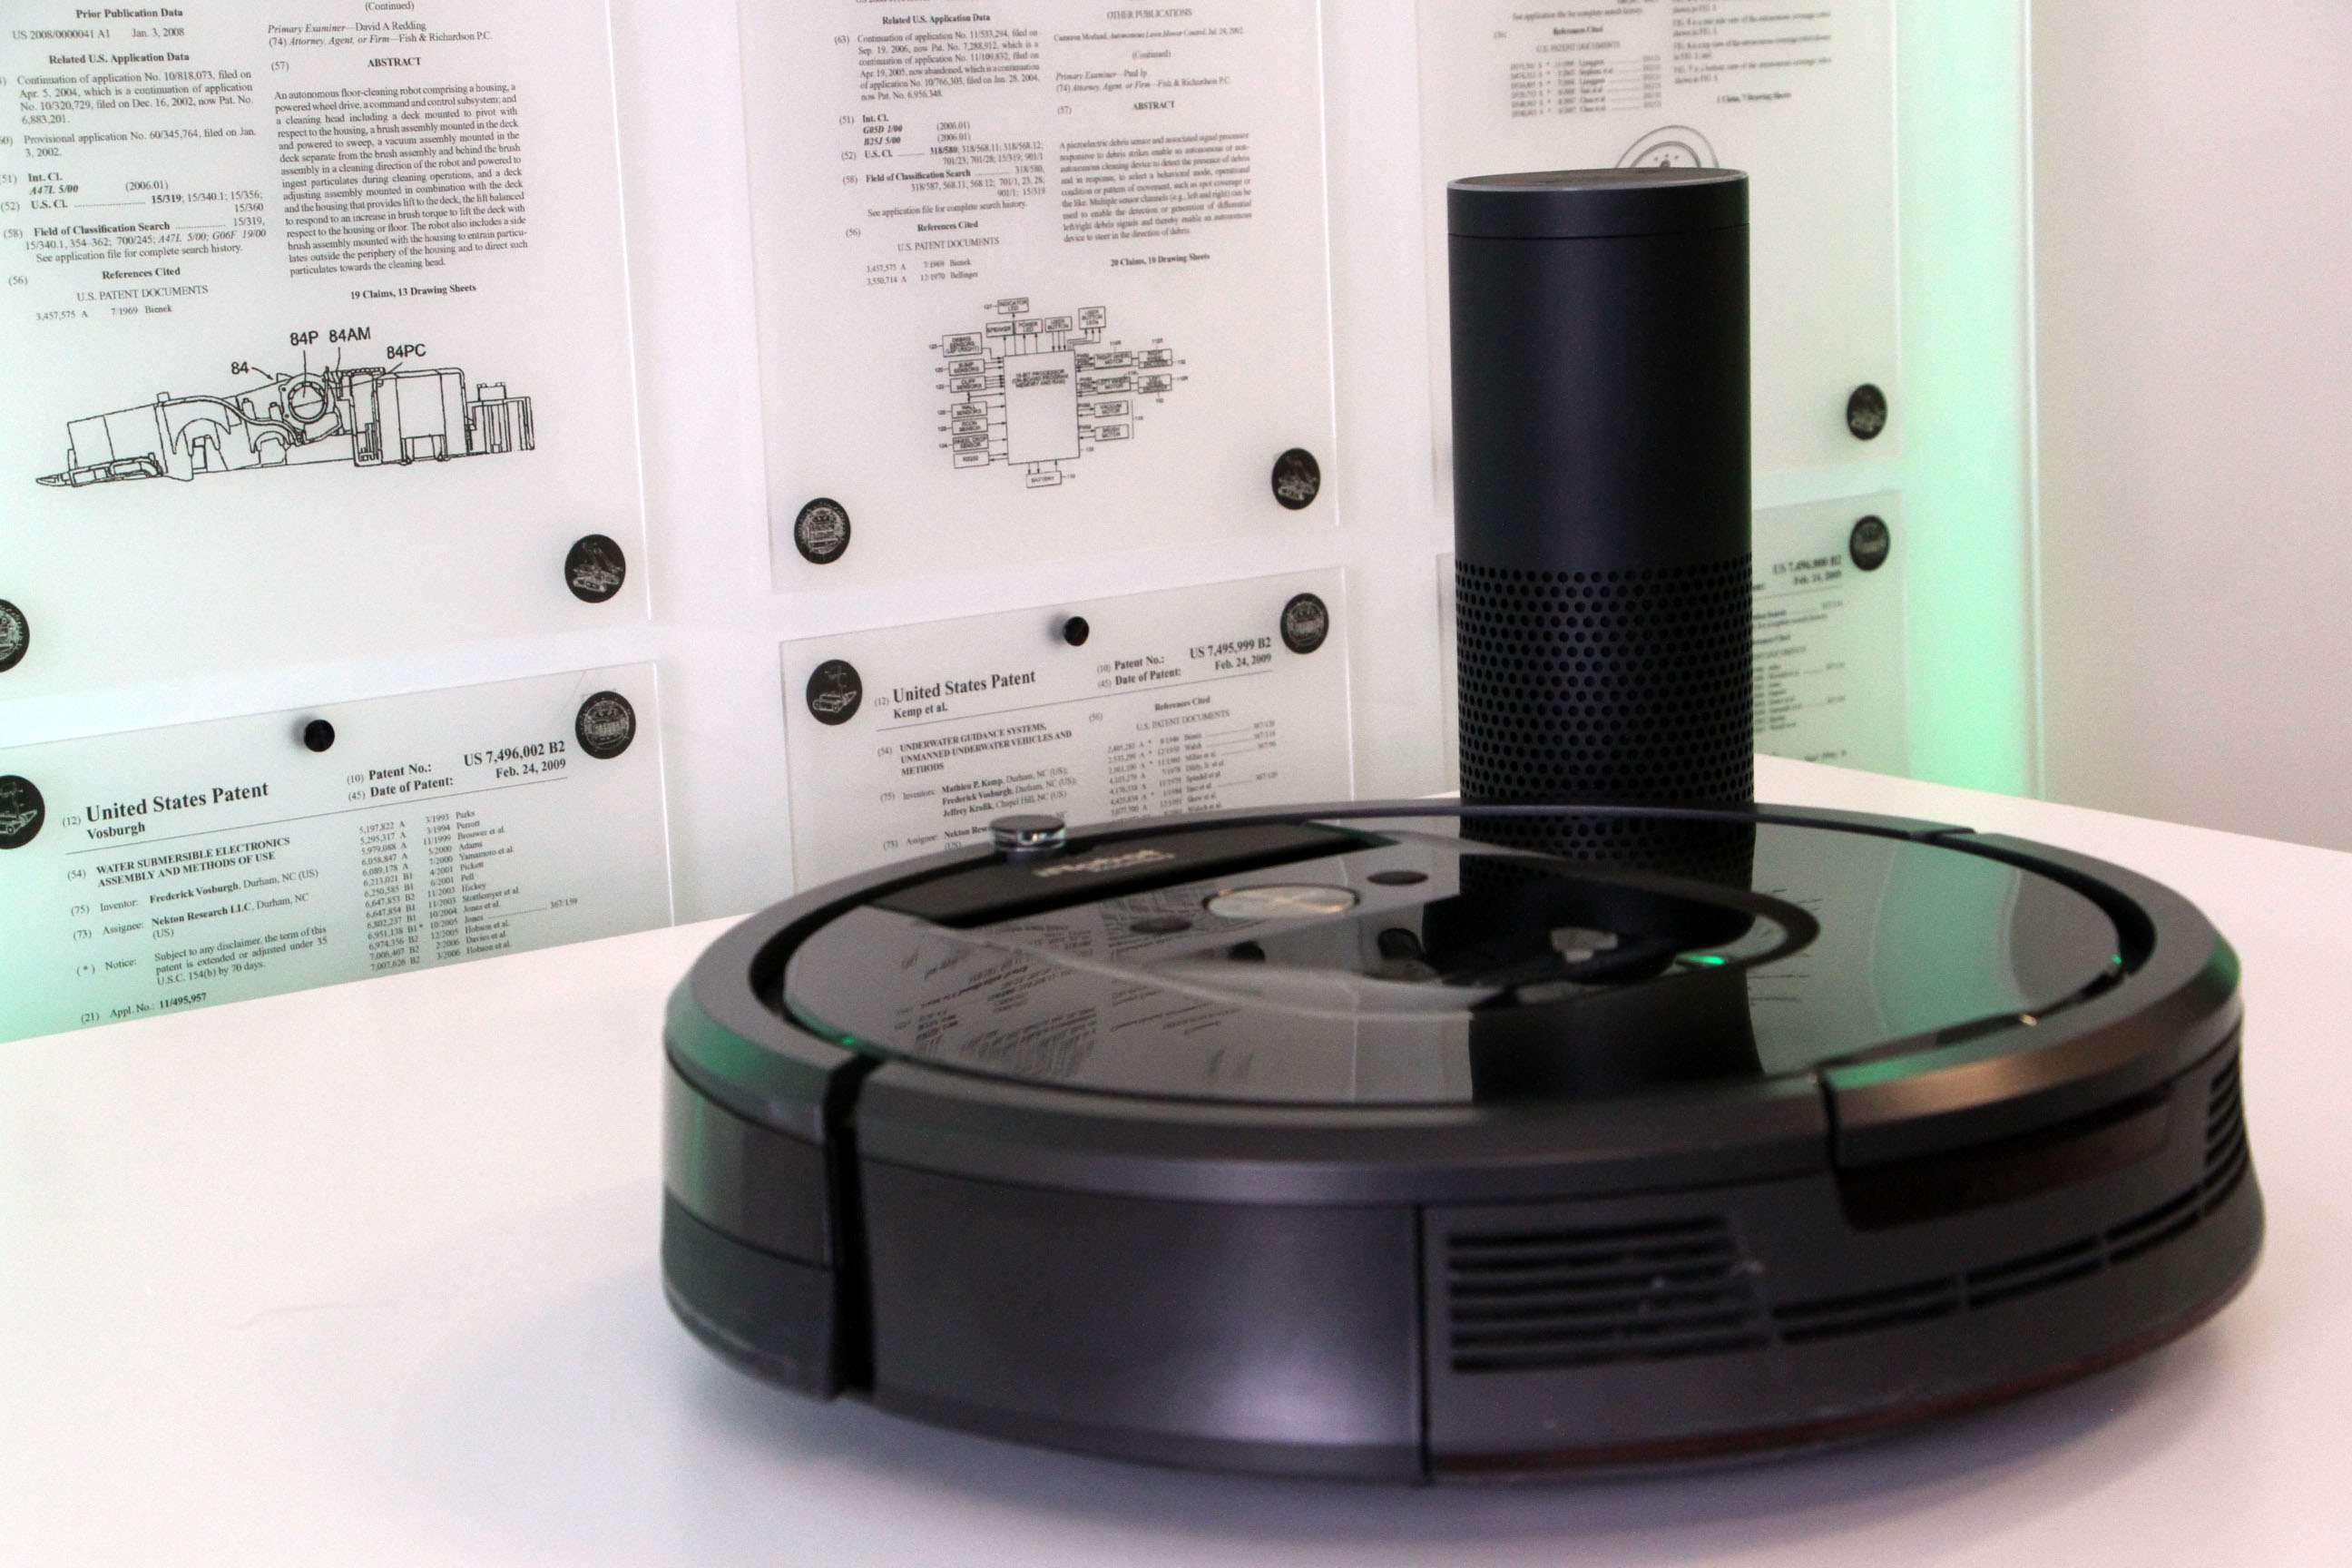 iRobot’s CEO defends Roomba home mapping as privacy concerns arise